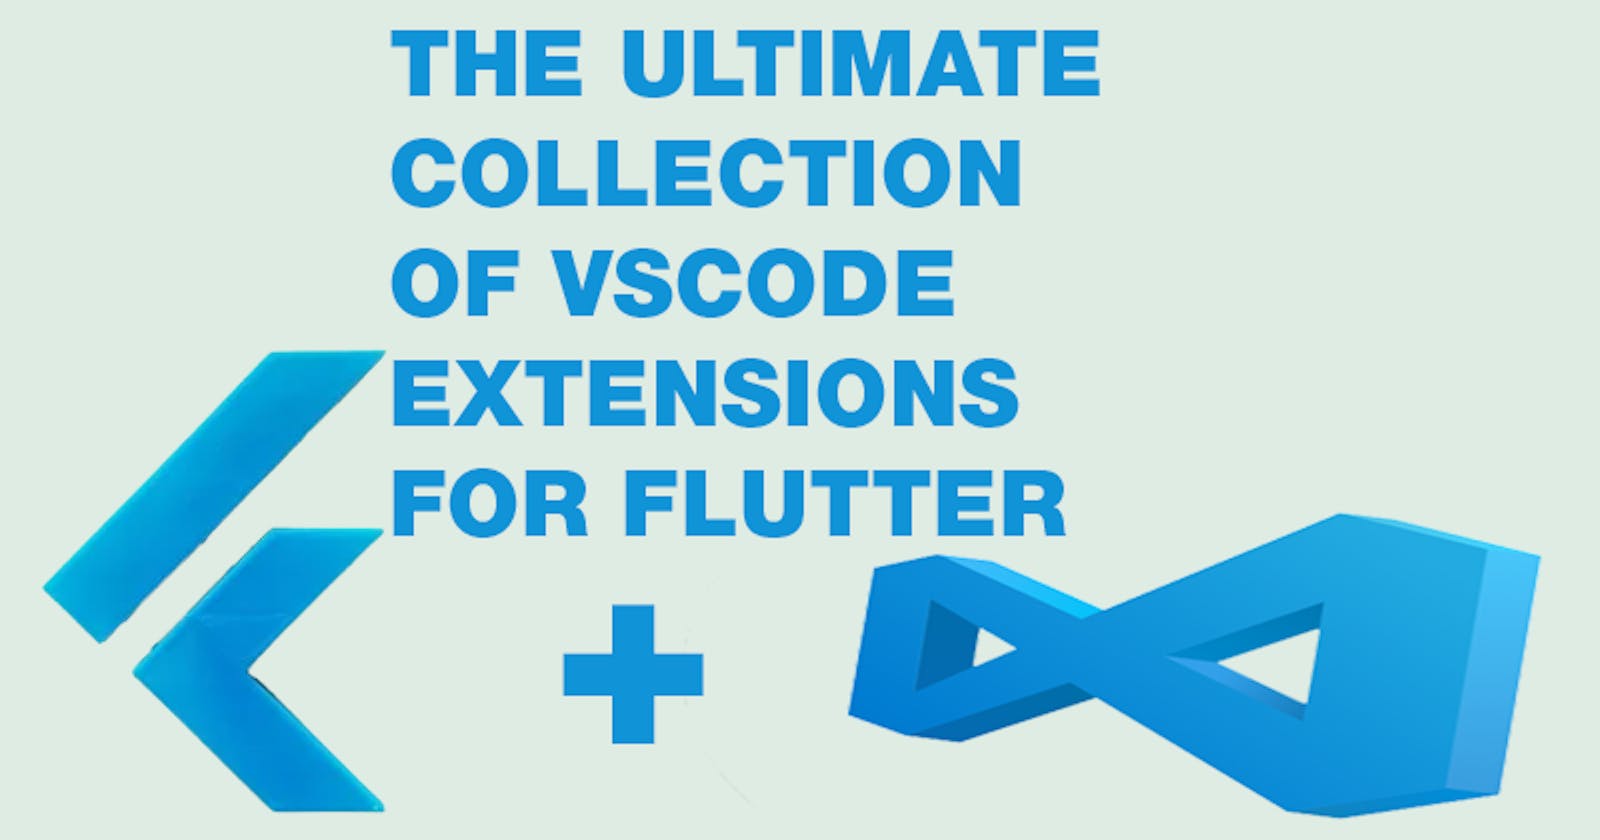 The ultimate collection of vscode extensions for flutter